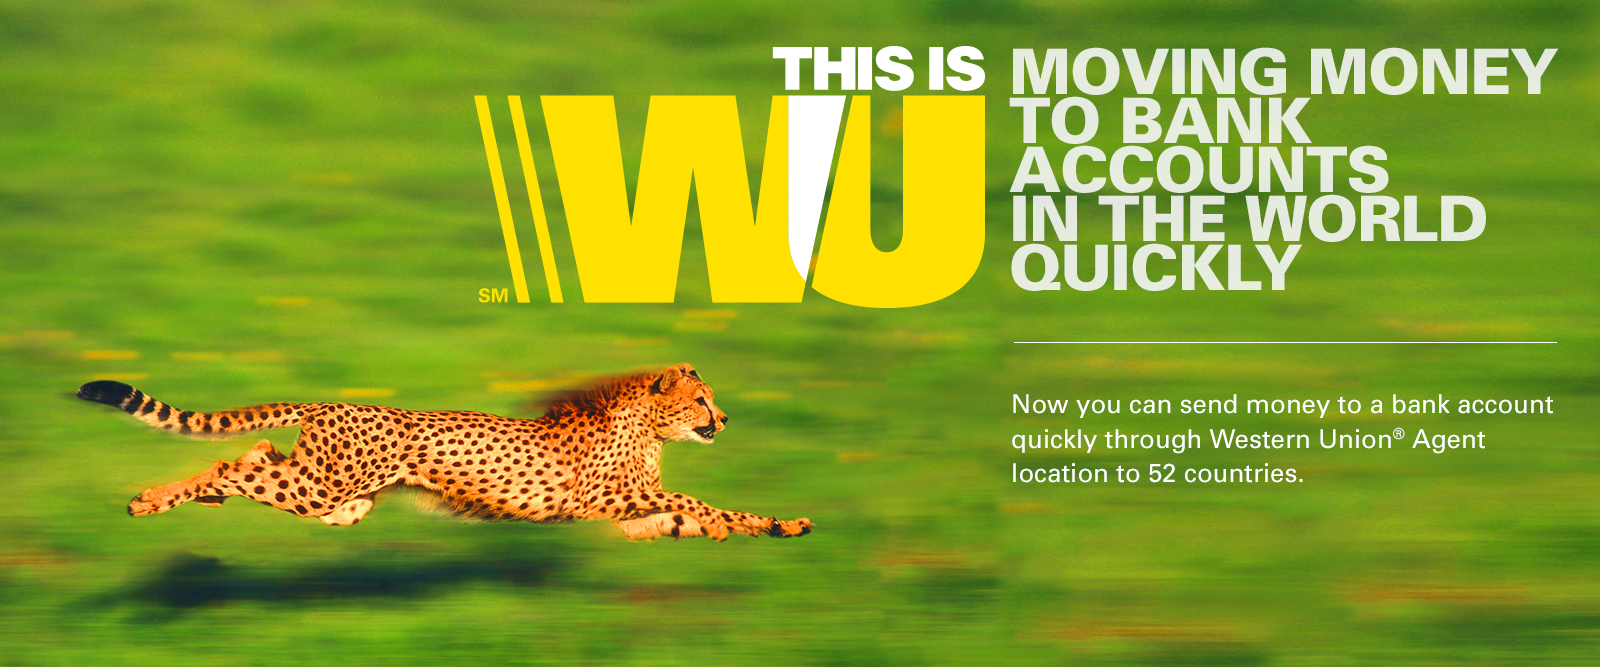 THIS IS WU MOVING MONEY TO BANK ACCOUNTS IN THE WORLD QUICKLY. Now you can send money to a bank account quickly through Western Union® Agent location to 52 countries.